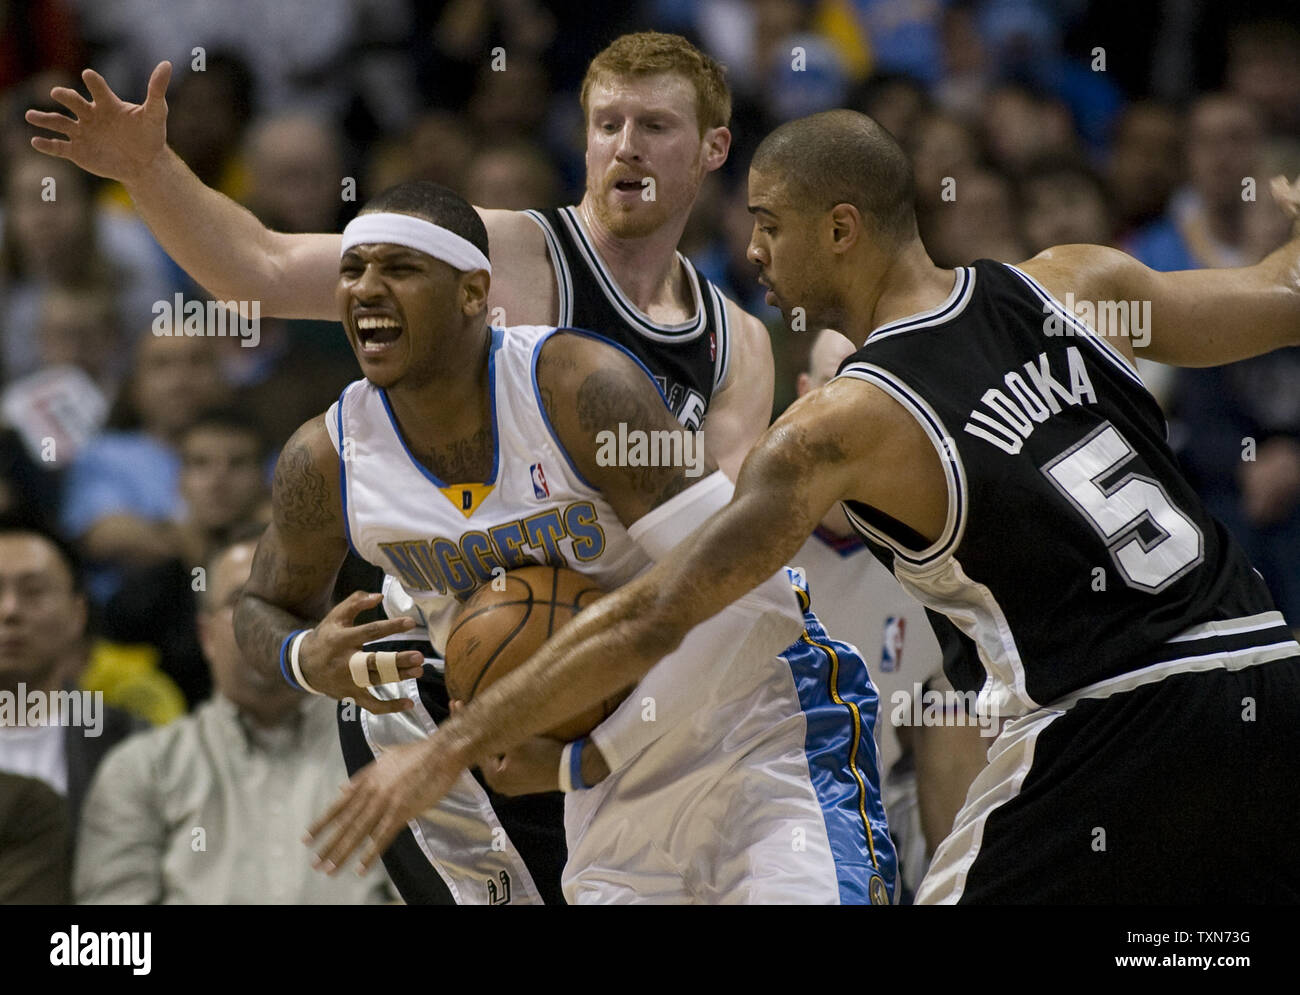 Denver Nuggets Carmelo Anthony (C) breaks free from San Antonio Spurs Matt Bonner (C) and Ime  Udoka during the second half in a matchup between division leaders at the Pepsi Center in Denver on February 3, 2009.  Denver beat San Antonio 104-96 as Spurs Tim Duncan and Tony Parker did not play.  (UPI Photo/Gary C. Caskey) Stock Photo